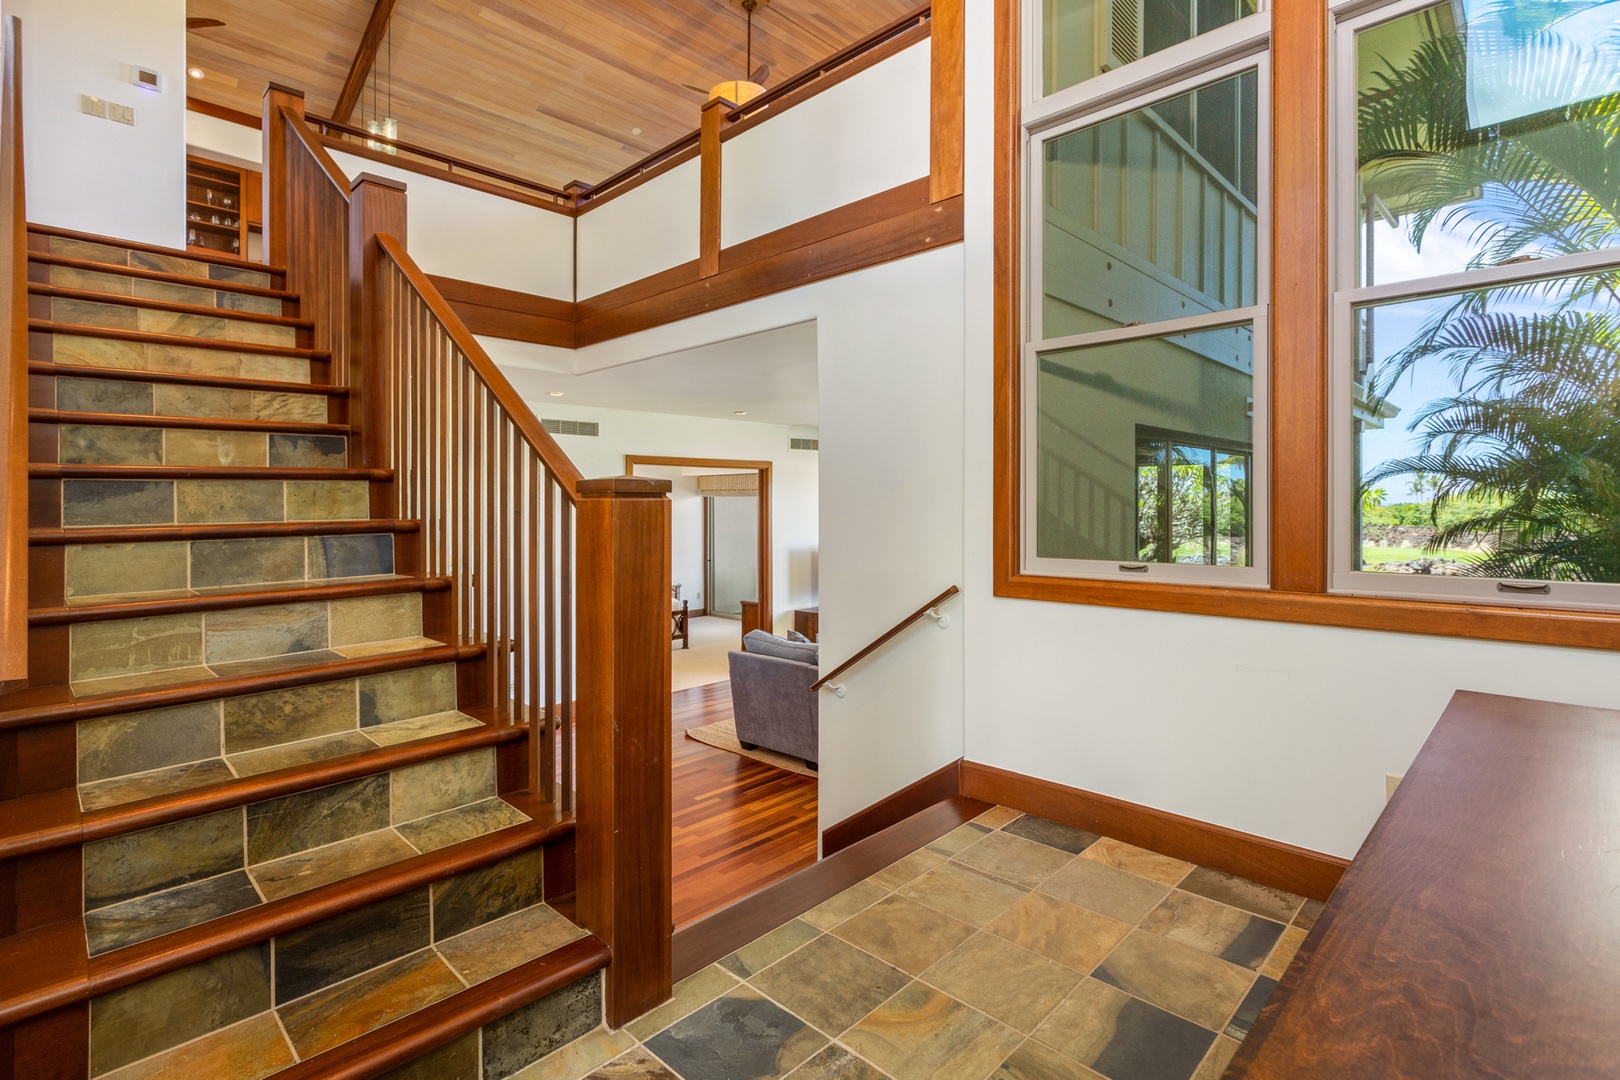 Kailua Kona Vacation Rentals, OFB 3BD Ka'Ulu Villa (129D) at Four Seasons Resort at Hualalai - Stately entryway reveals stairways to the upper and lower levels.